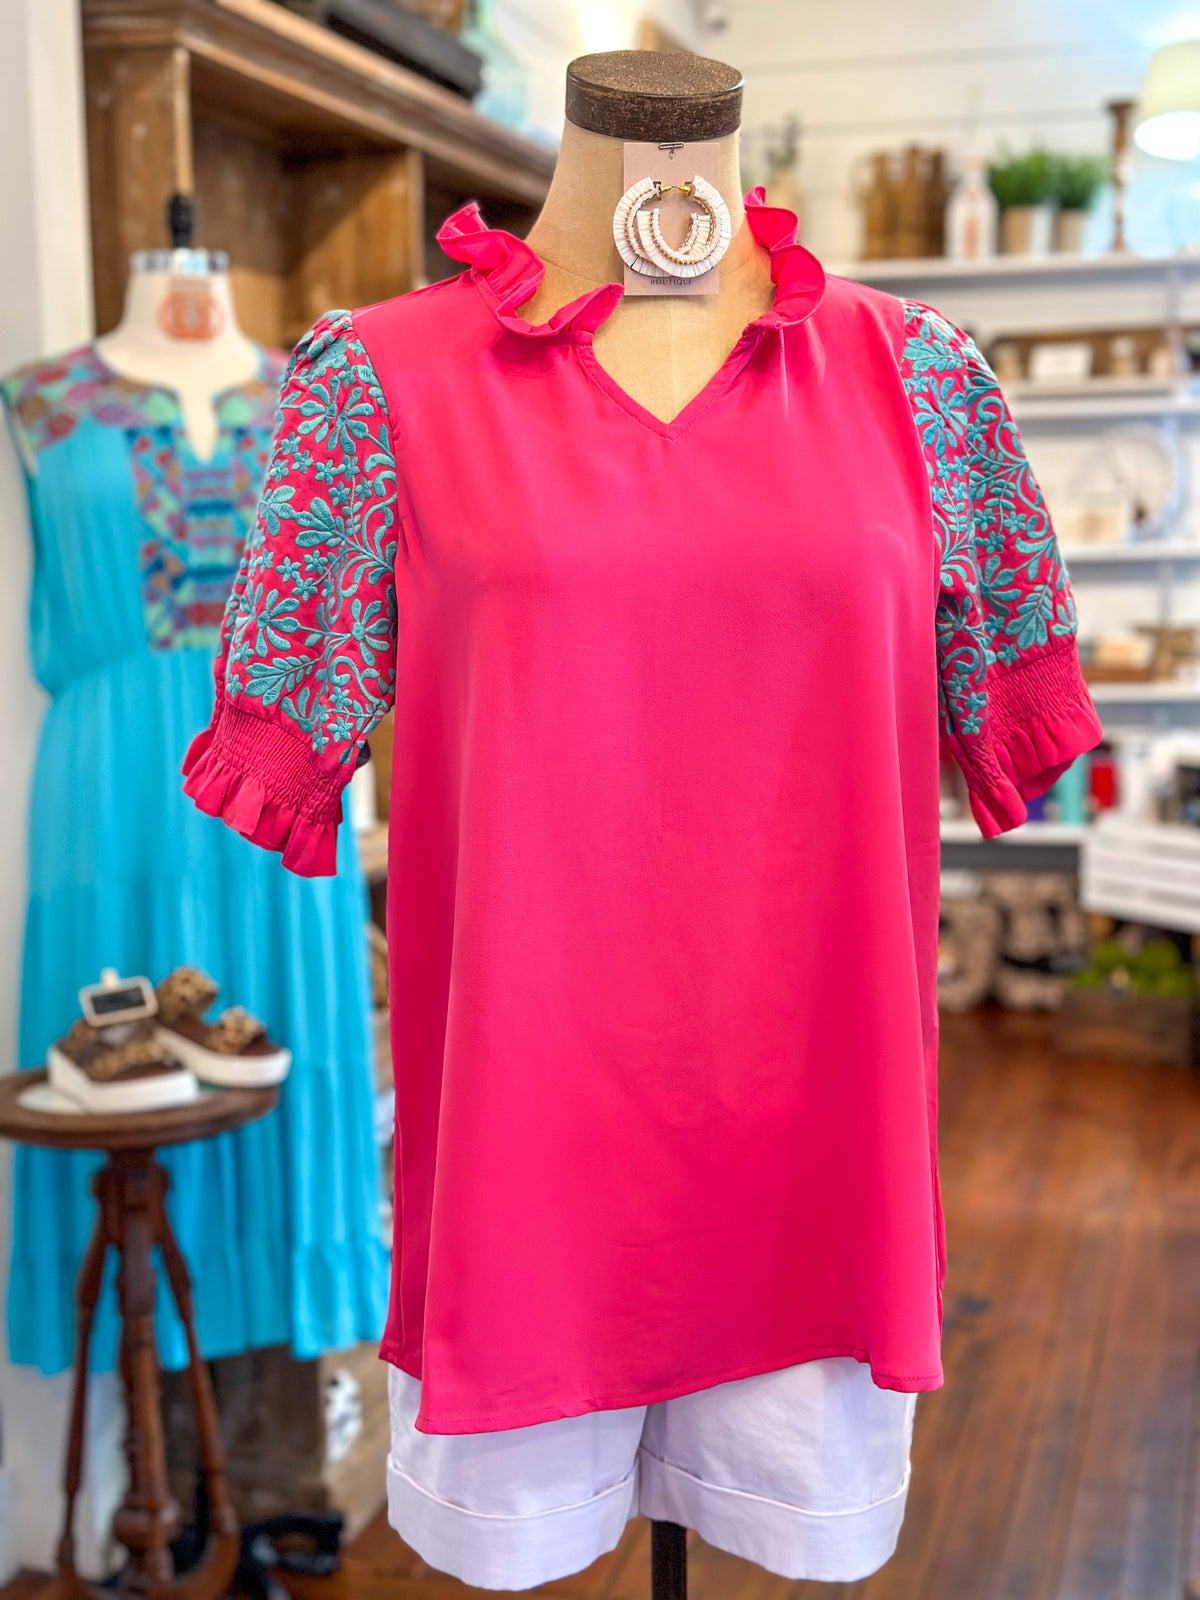 hot pink top with ruffle neckline and turquoise embroidery on sleeves washco